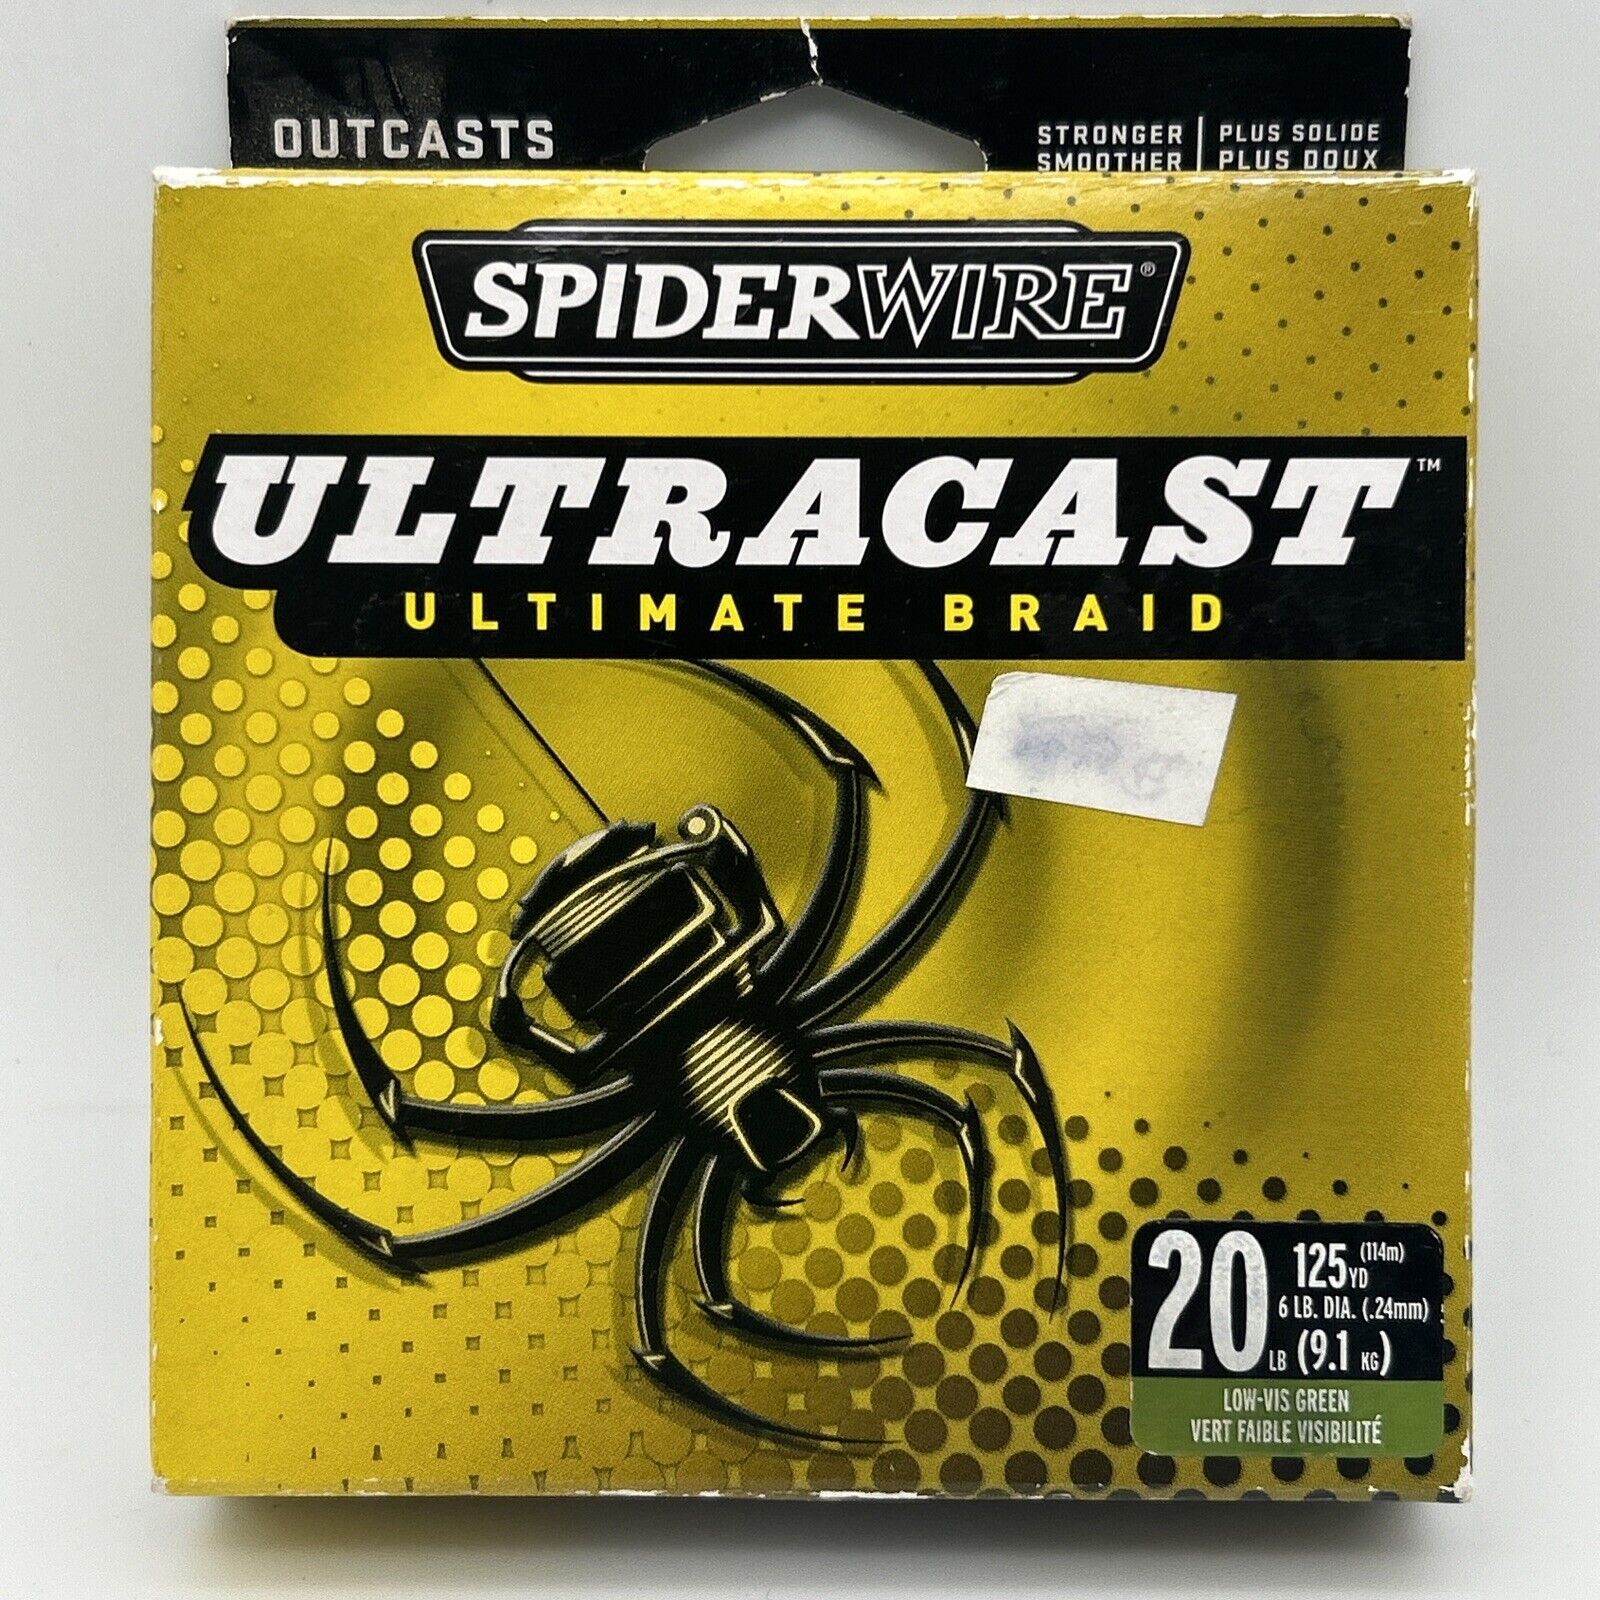 Spider wire Ultracast Ultimate Braid 20lb 125yard Fishing Line New